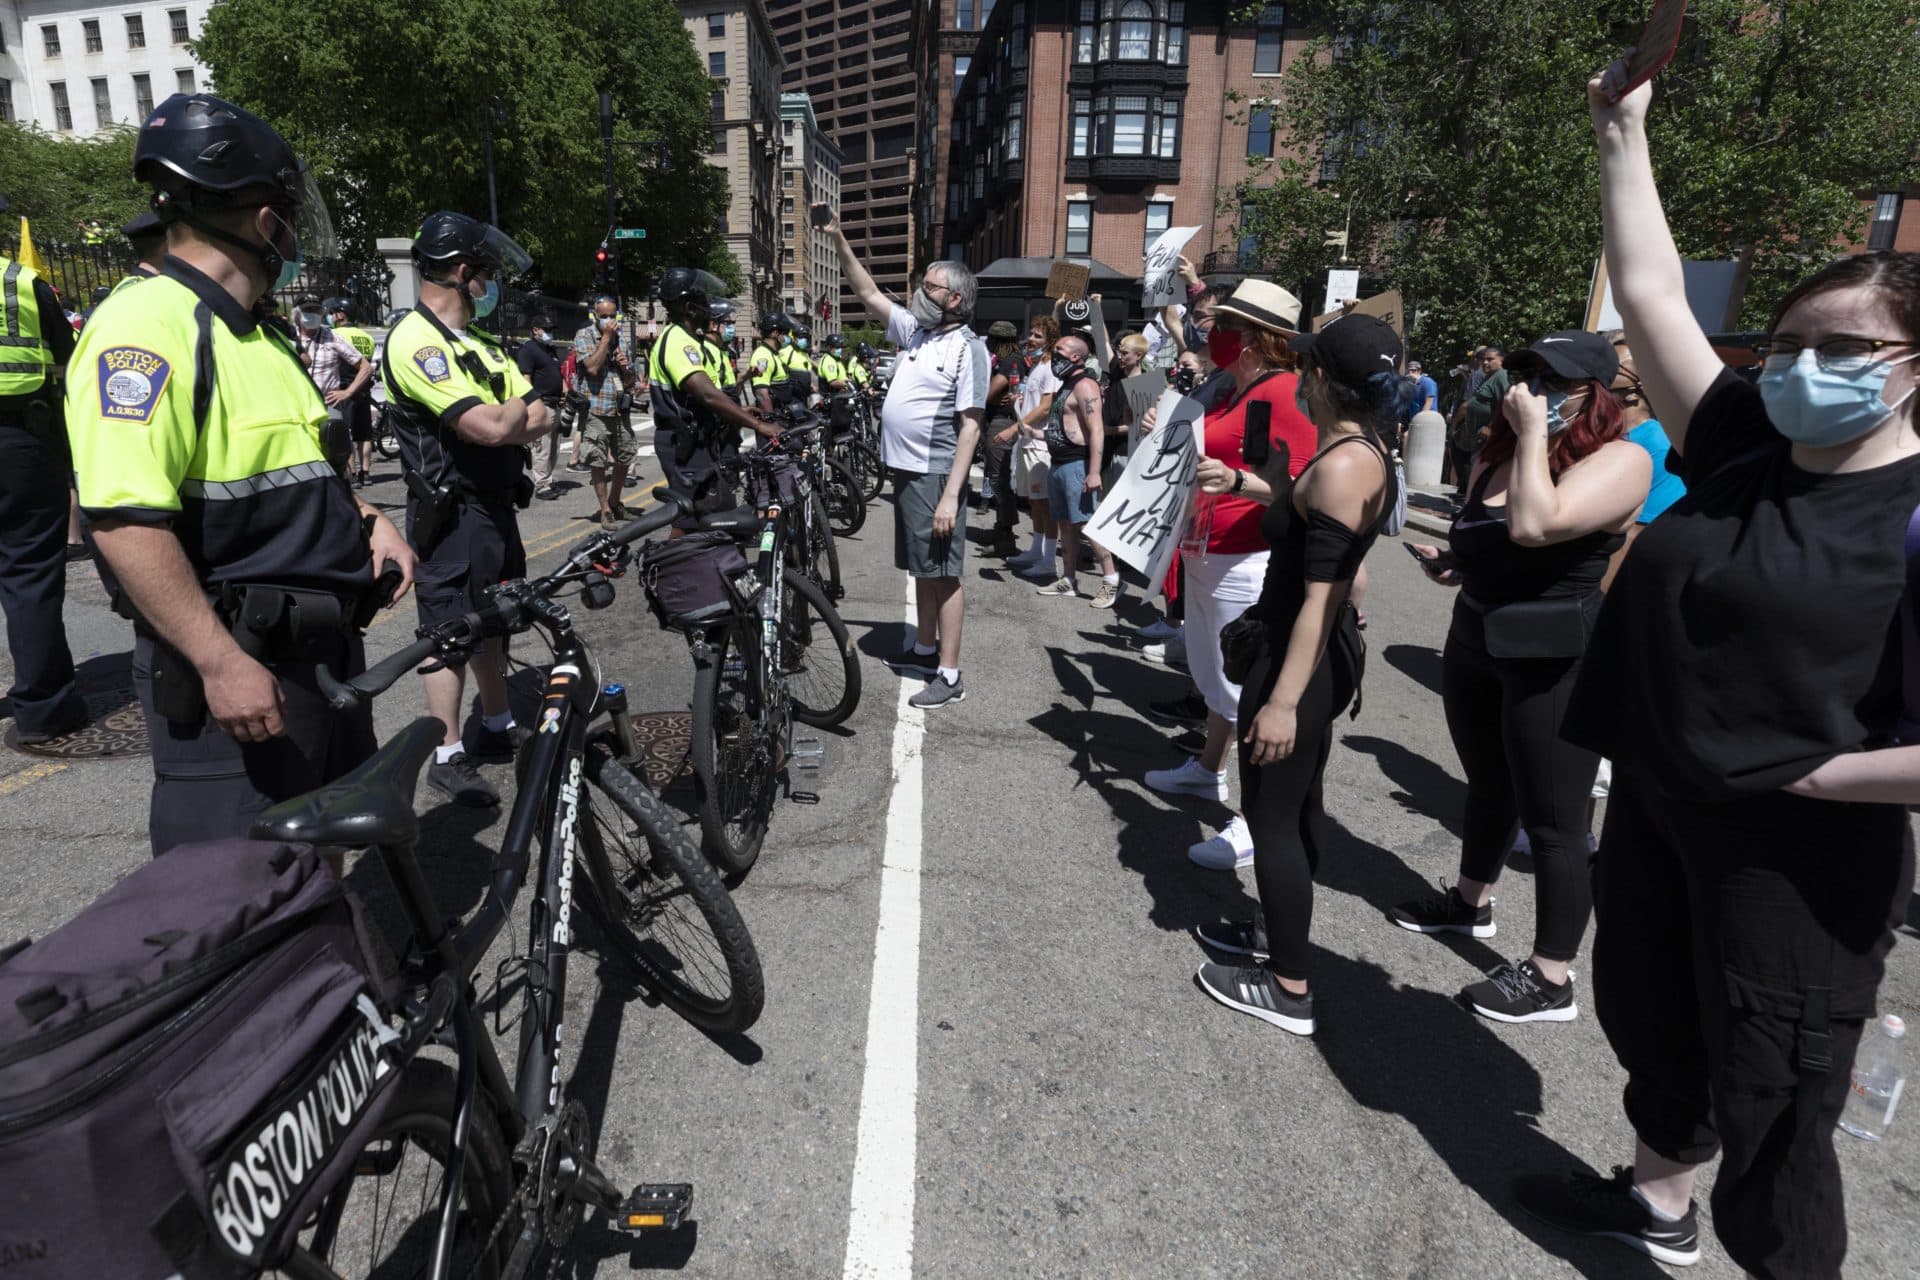 Police stand between counter-protesters and a demonstration calling for the lifting of all government restrictions relating to concern about the spread of COVID-19, Saturday, May 30, 2020, outside the Statehouse in Boston. (AP Photo/Michael Dwyer)